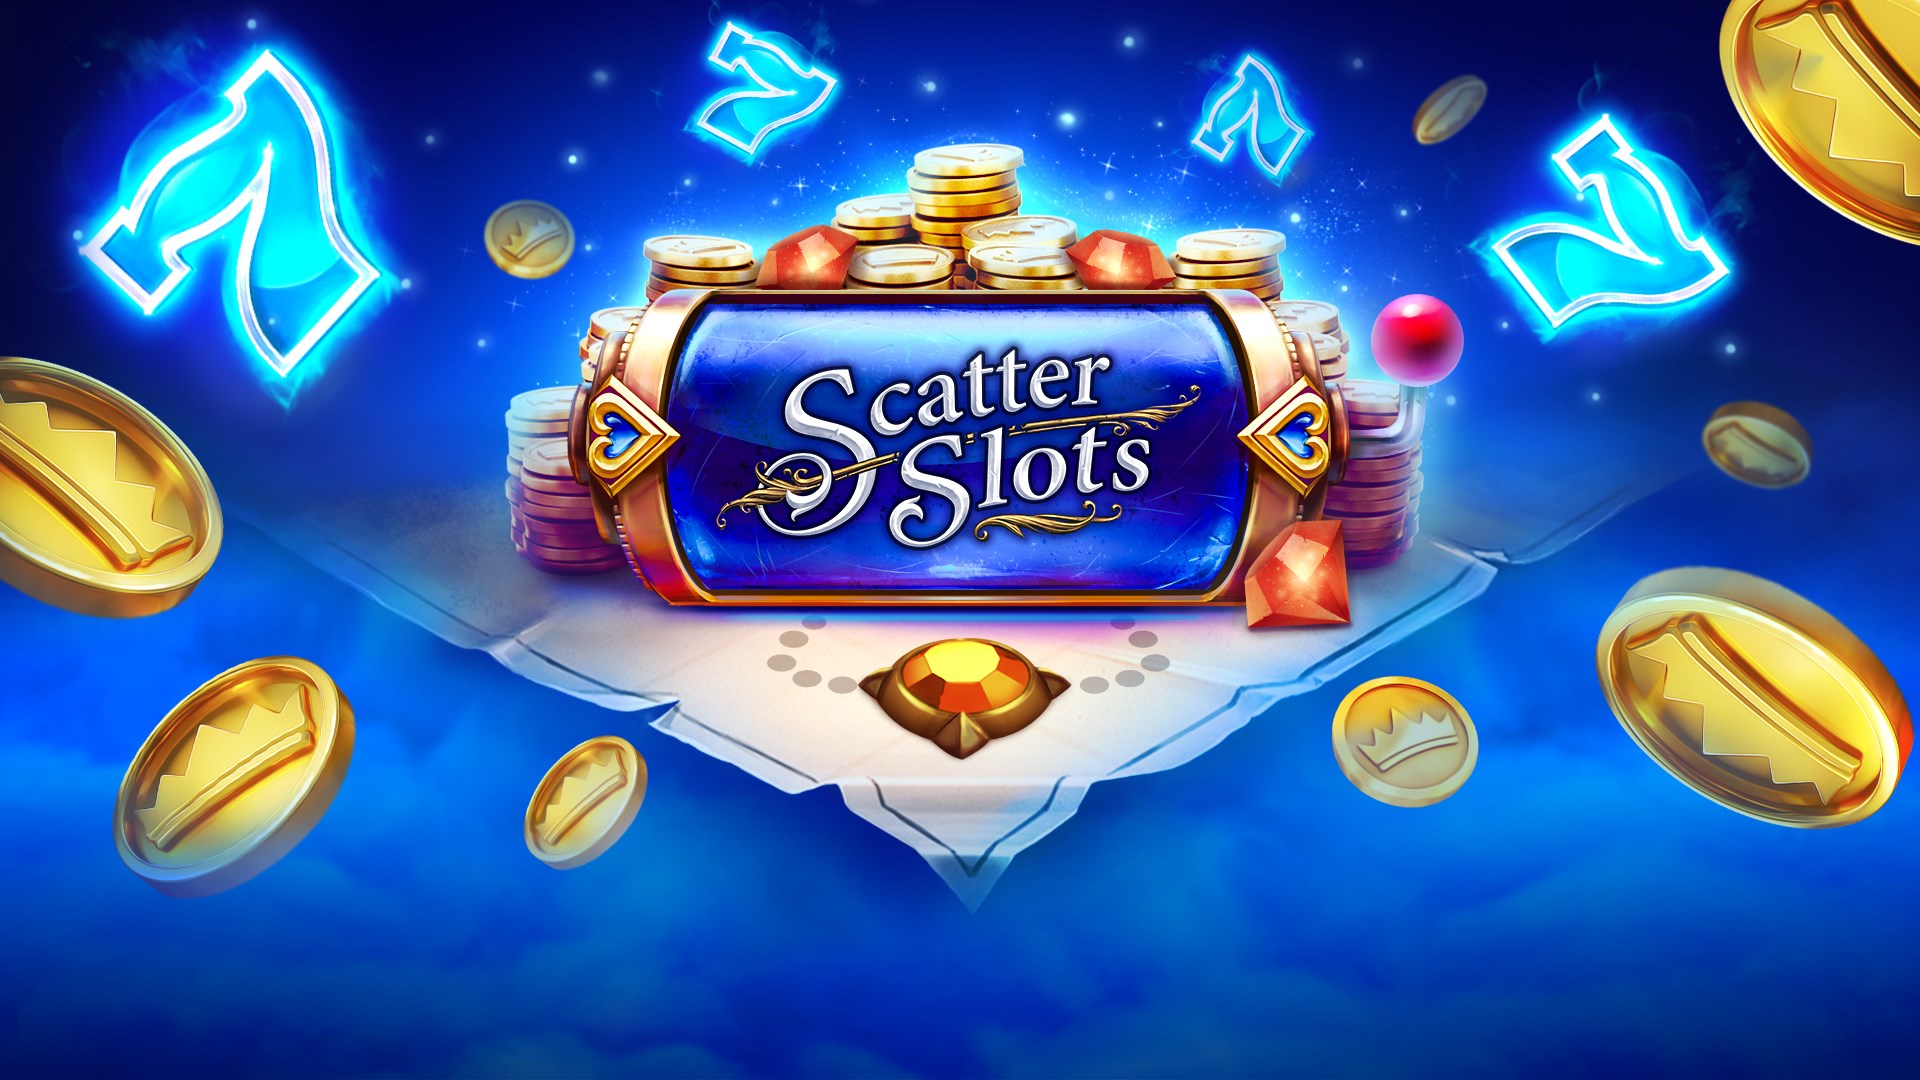 Scatter slots download for pc windows 8